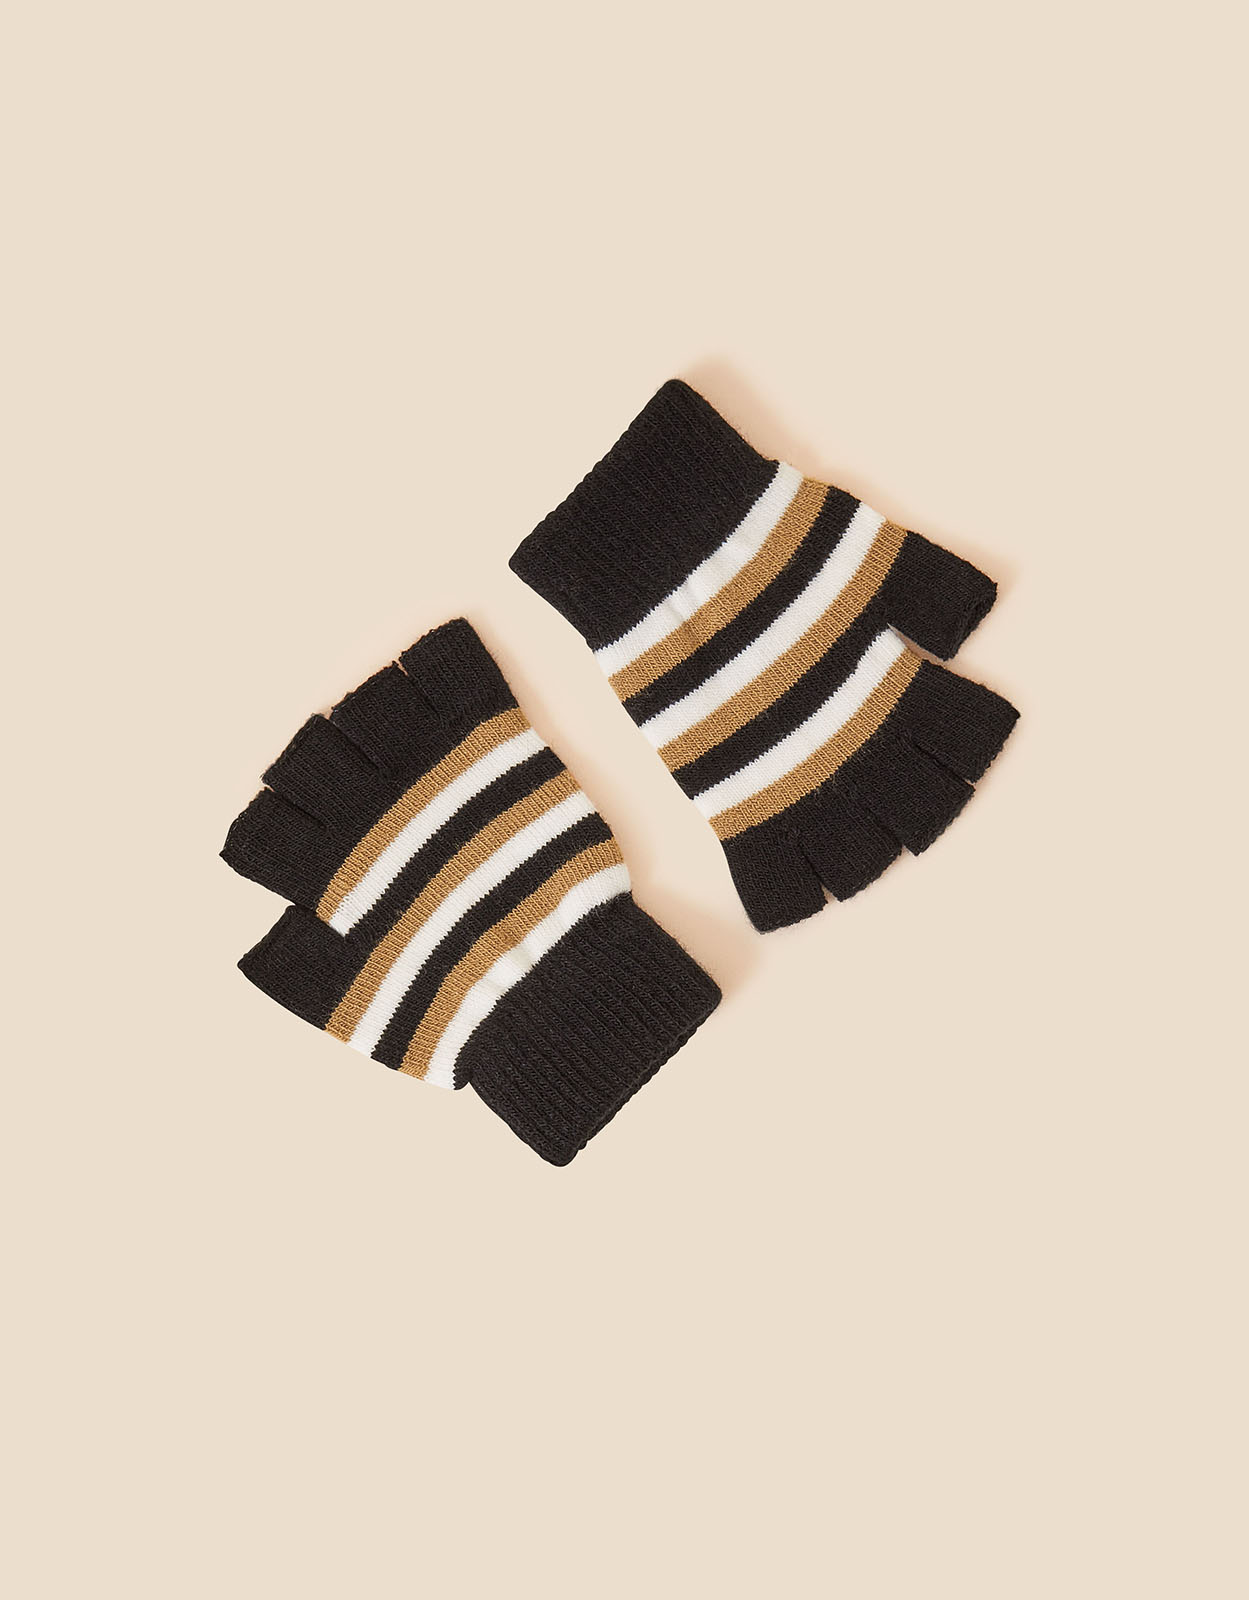 Accessorize Black, White and Gold Stripe Fingerless Gloves, Size: 16x9cm